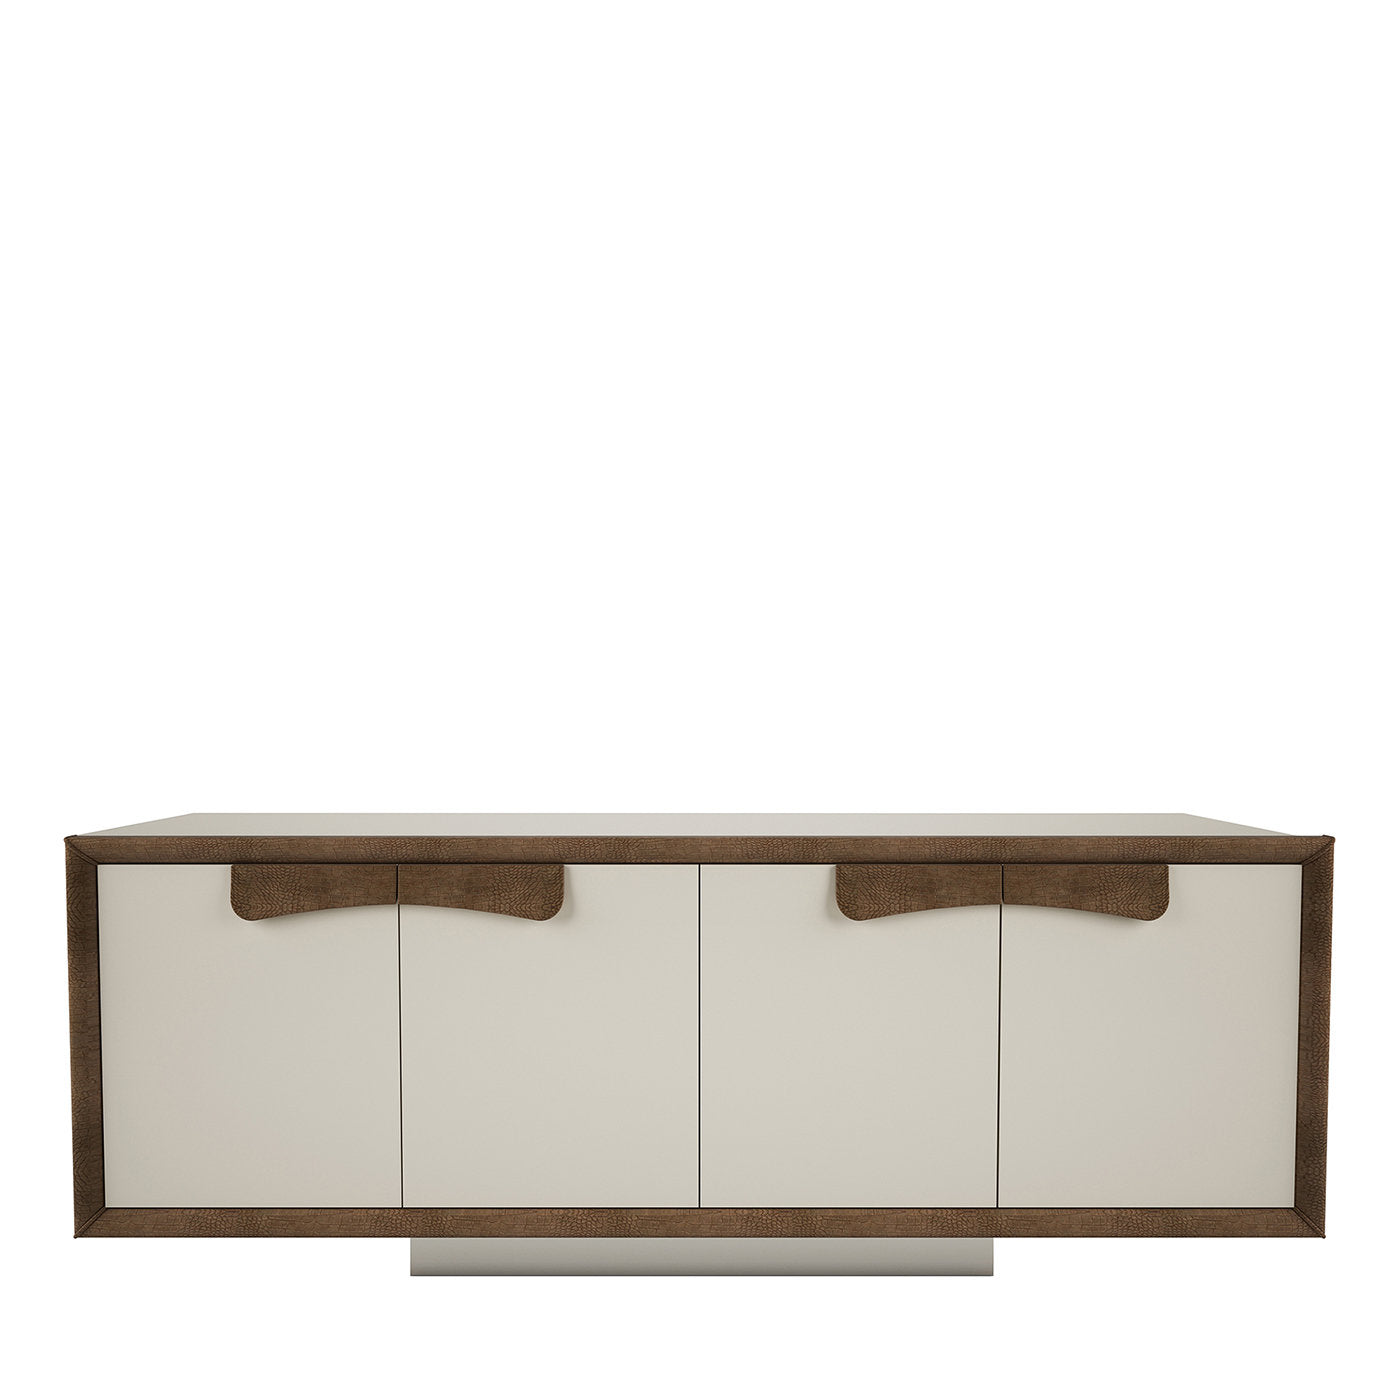  Astor White Sideboard by Hanno Giesler - Main view